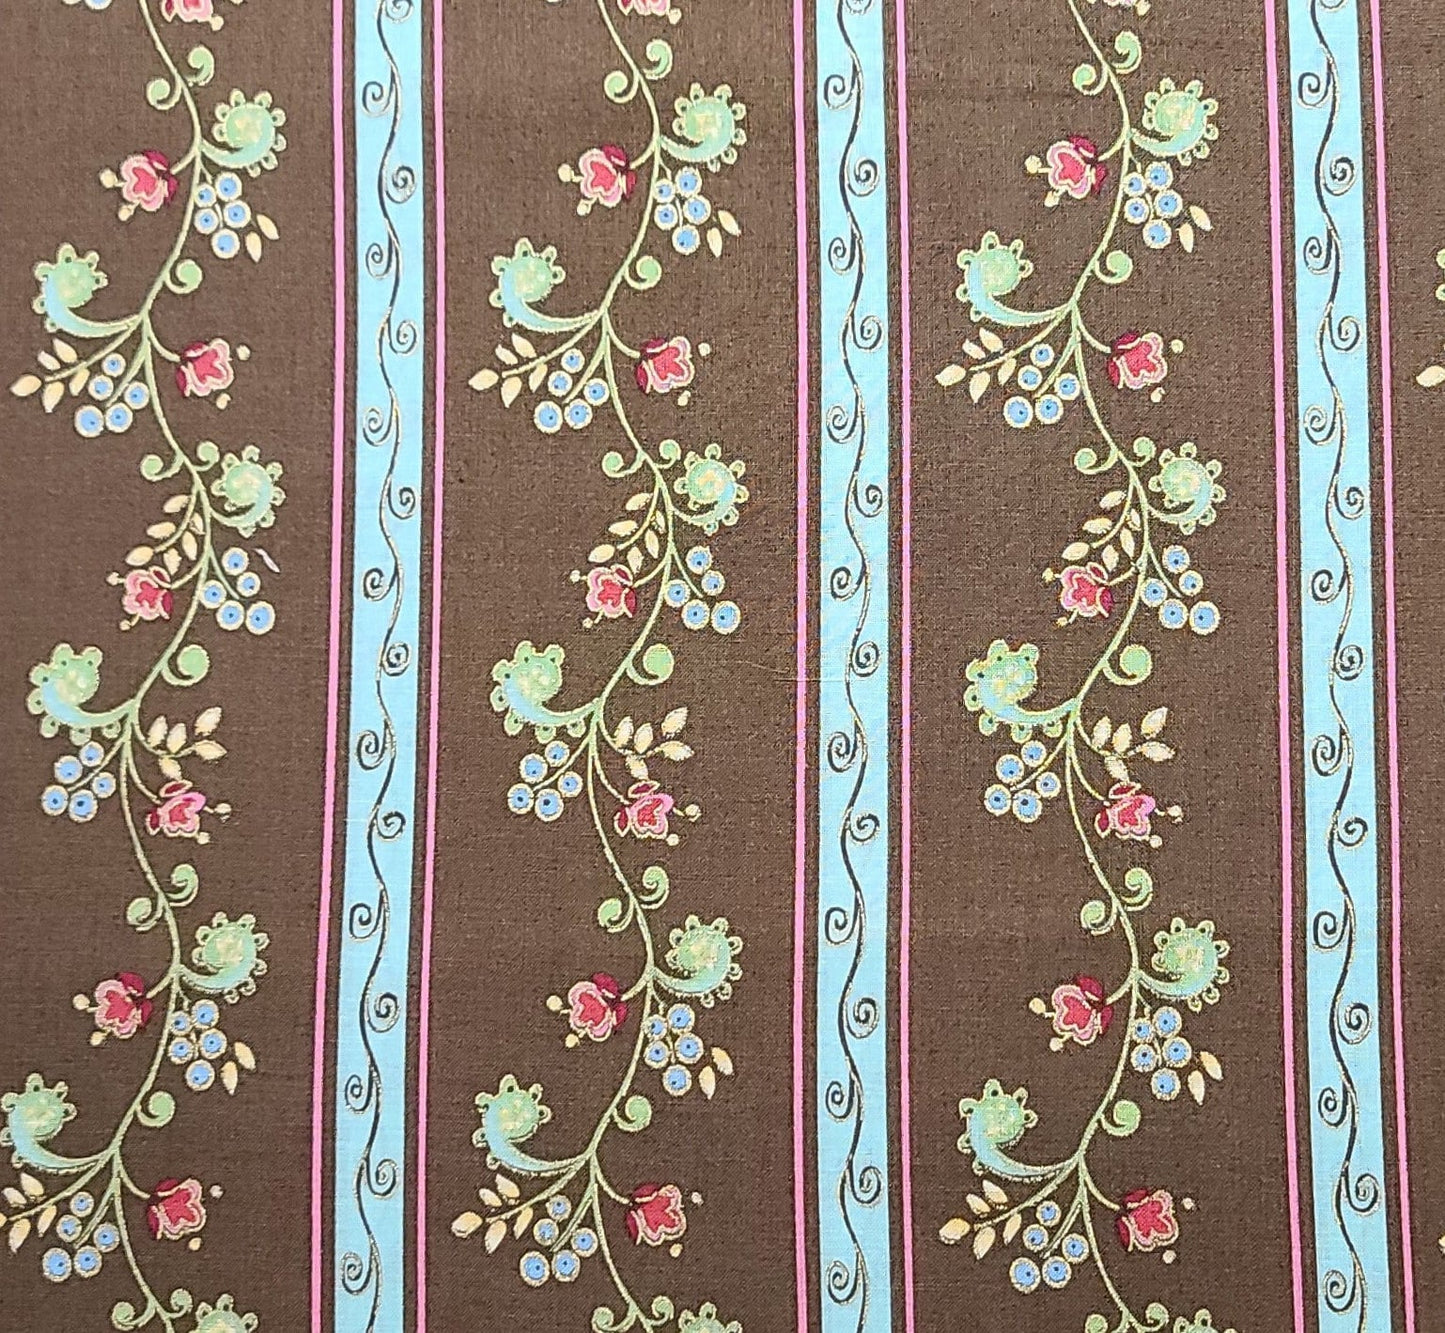 Marselles by Dana Designs 2010 Fabric Traditions Inc - Dark Brown, Light Turquoise, Red, Pale Blue Flower Vine Vertical Stripe Fabric